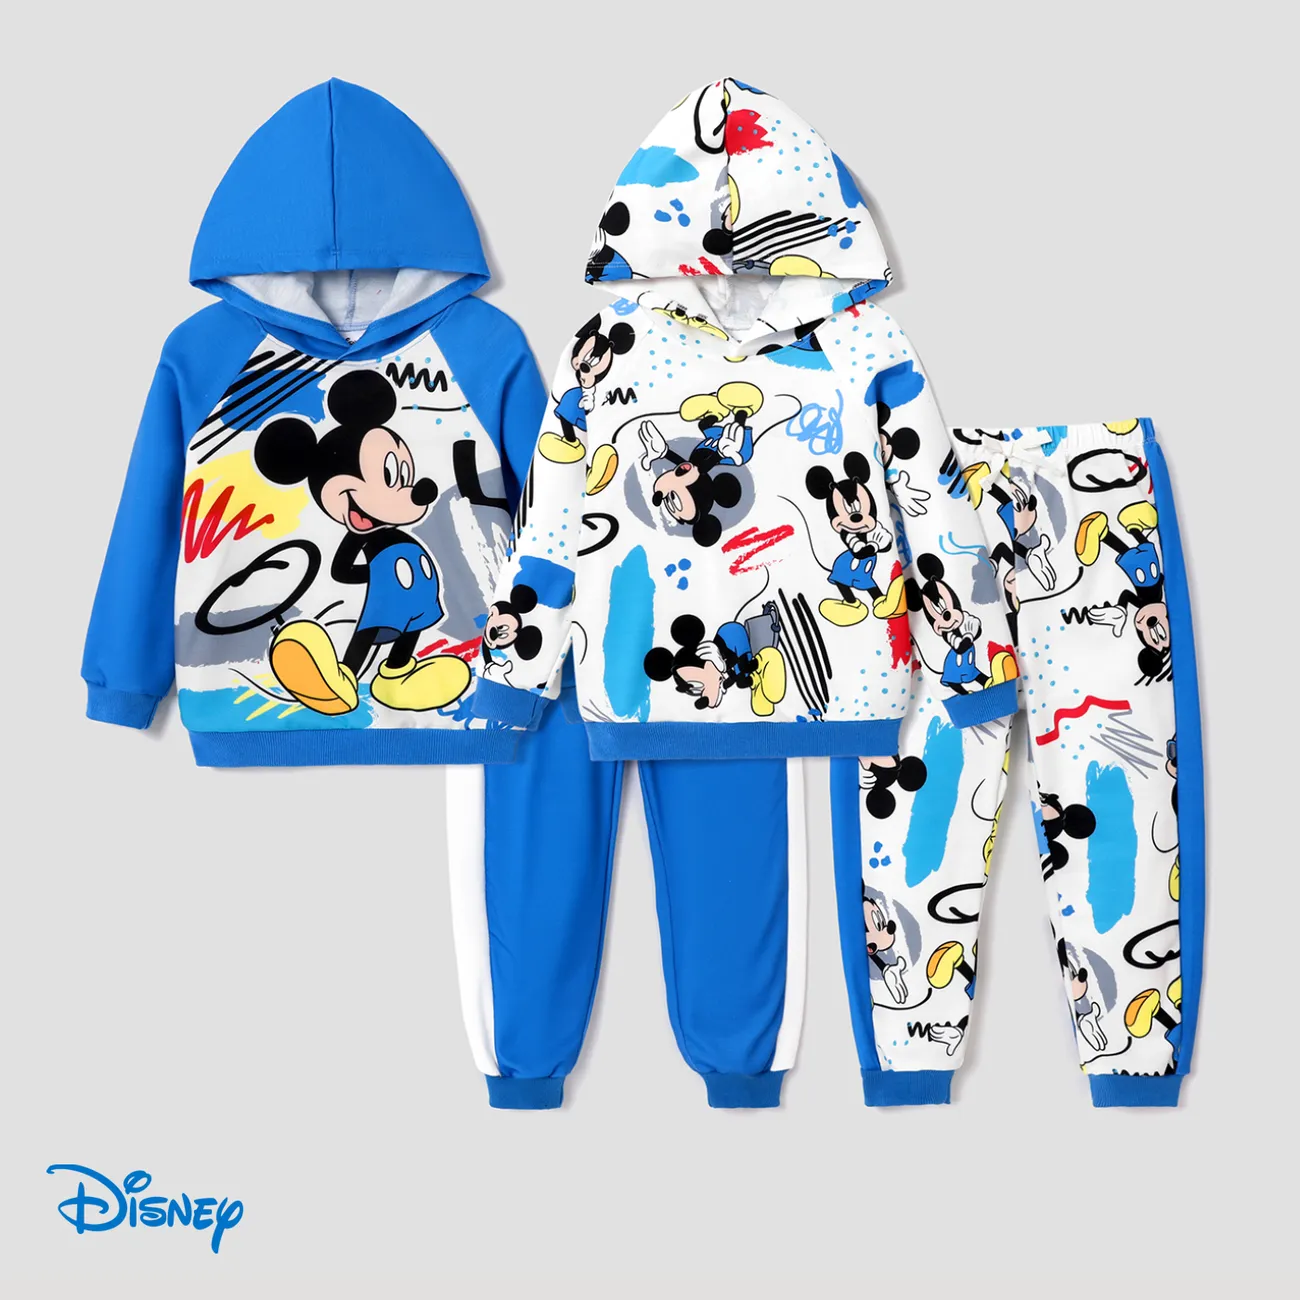 Disney Mickey and Friends Toddler Boy Character Print Long-sleeve Hooded Top and Pants Set Blue big image 1